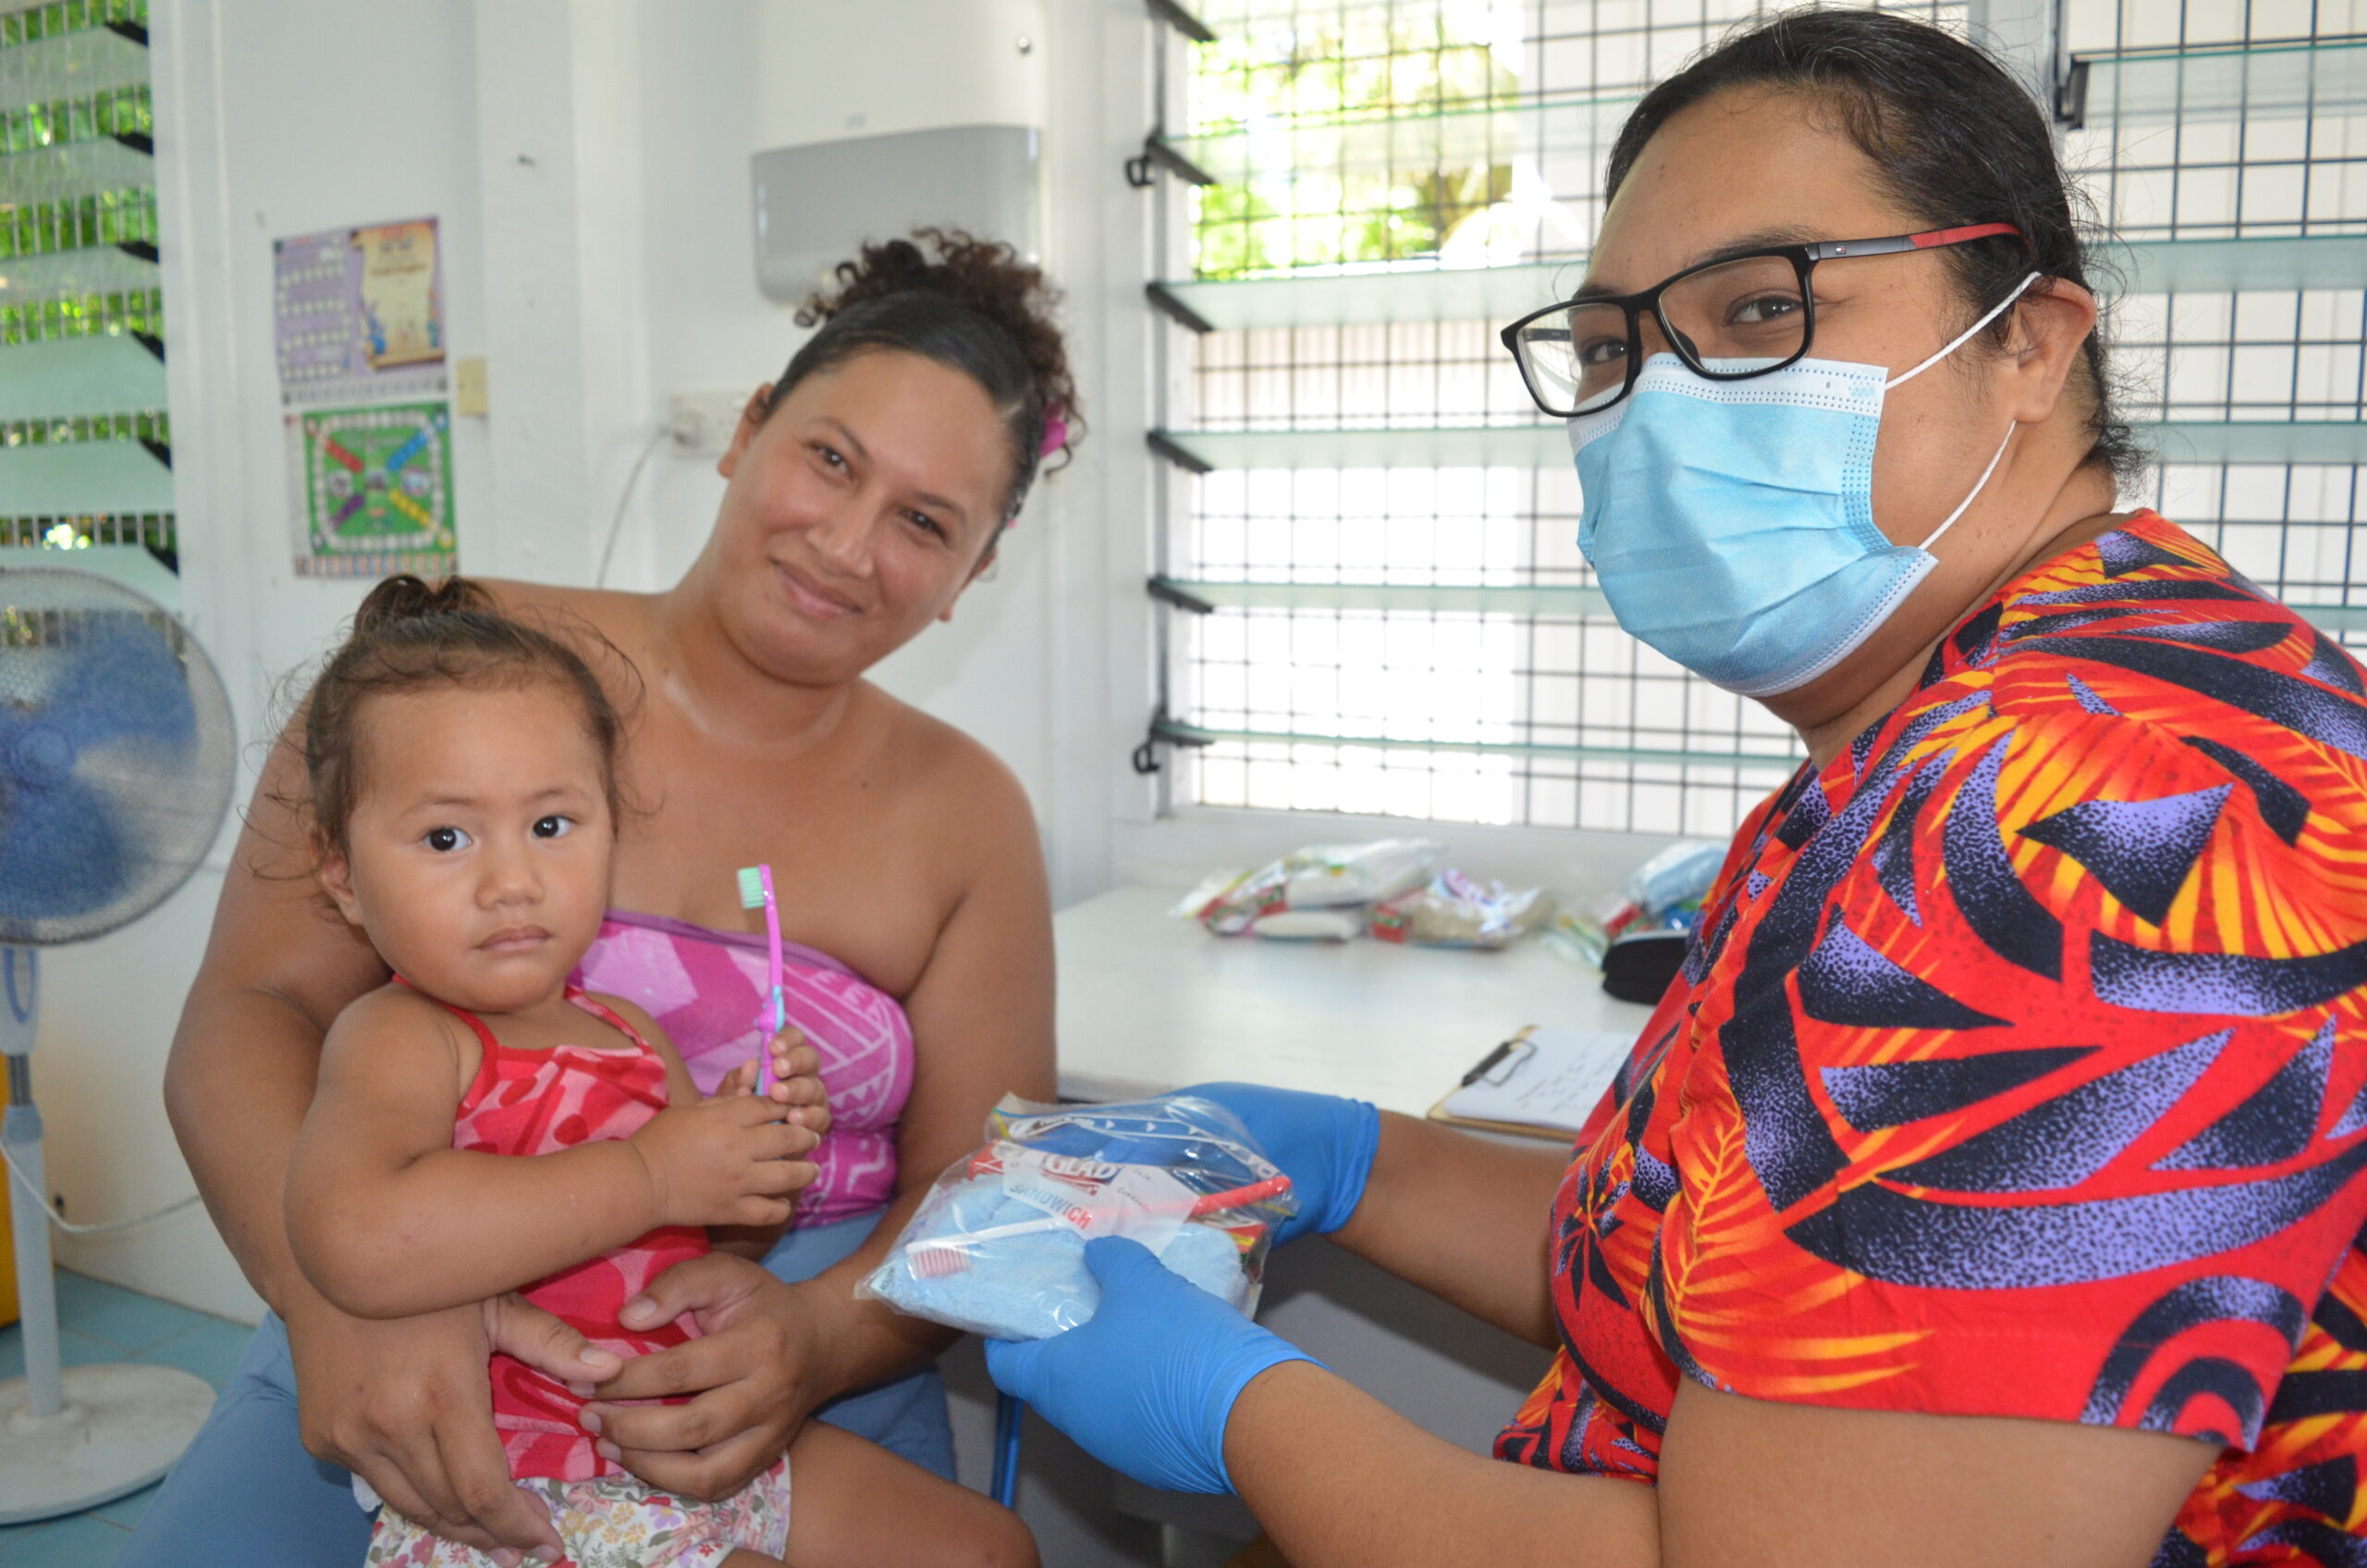 Baby Teeth Matters programme brings oral health care to Cook Islands children